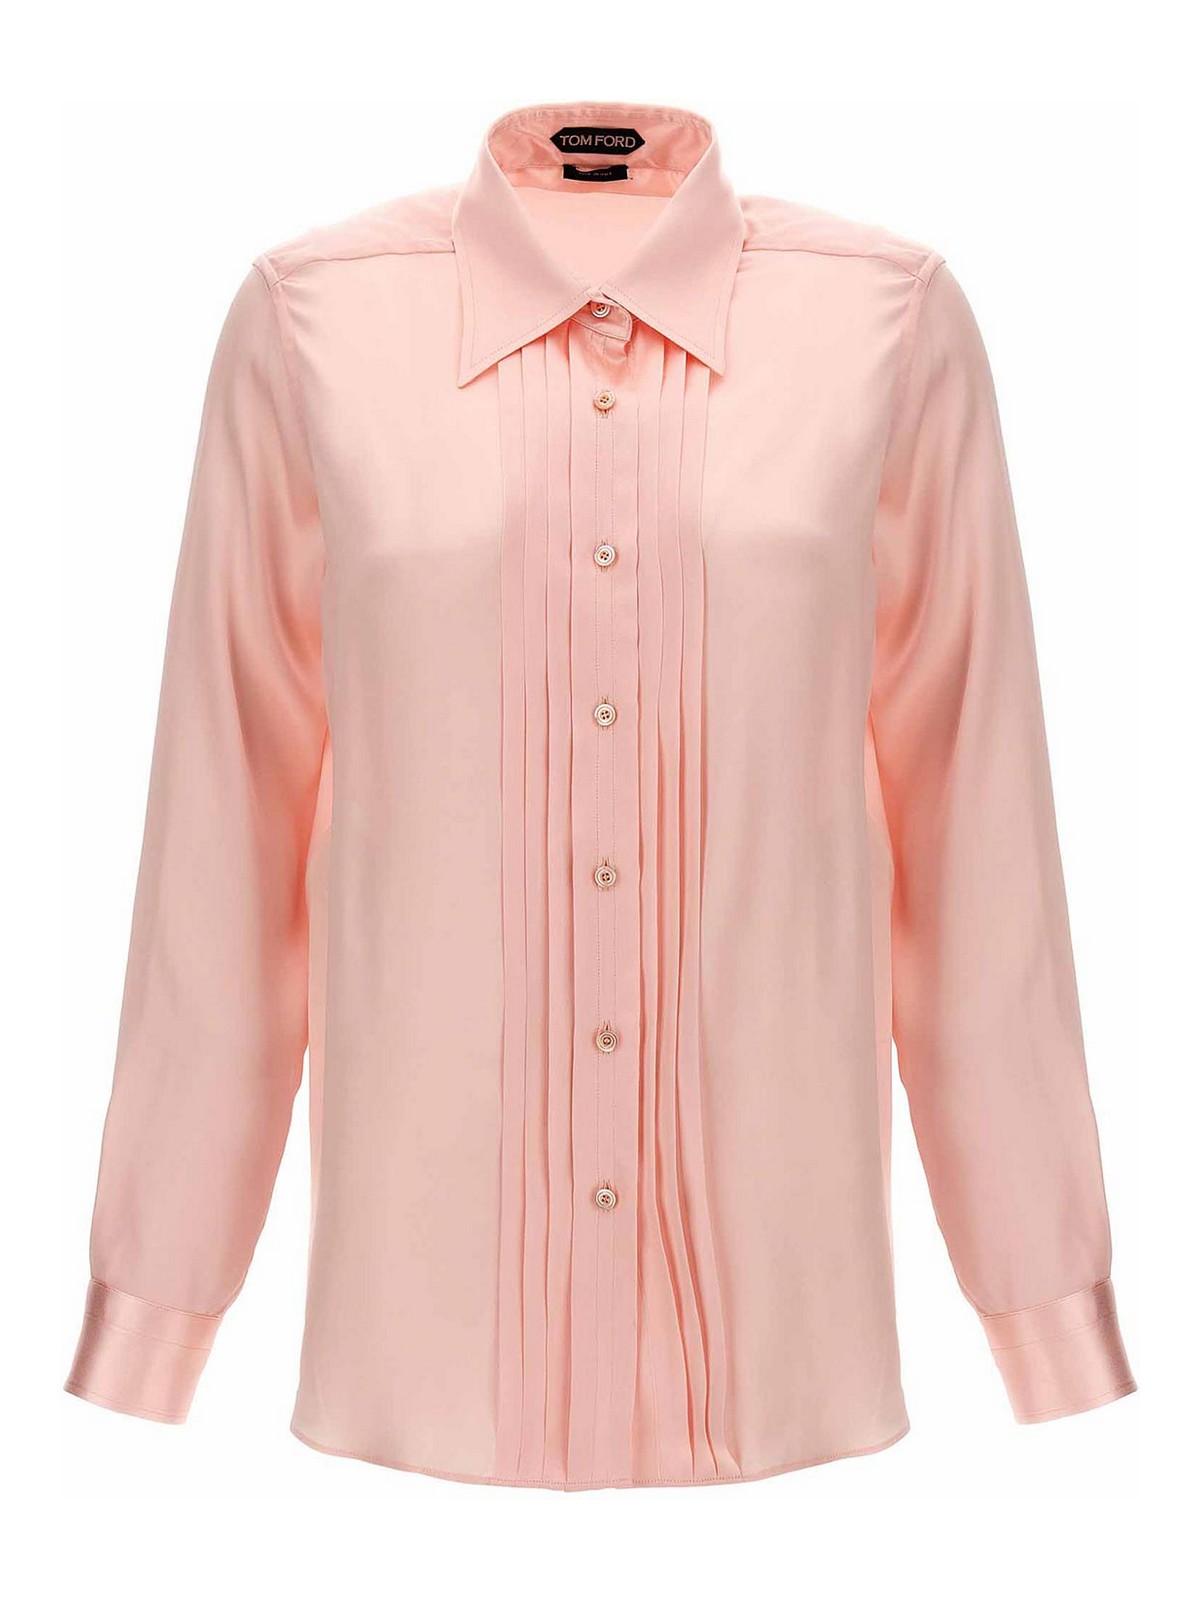 Shop Tom Ford Camisa - Color Carne Y Neutral In Nude & Neutrals